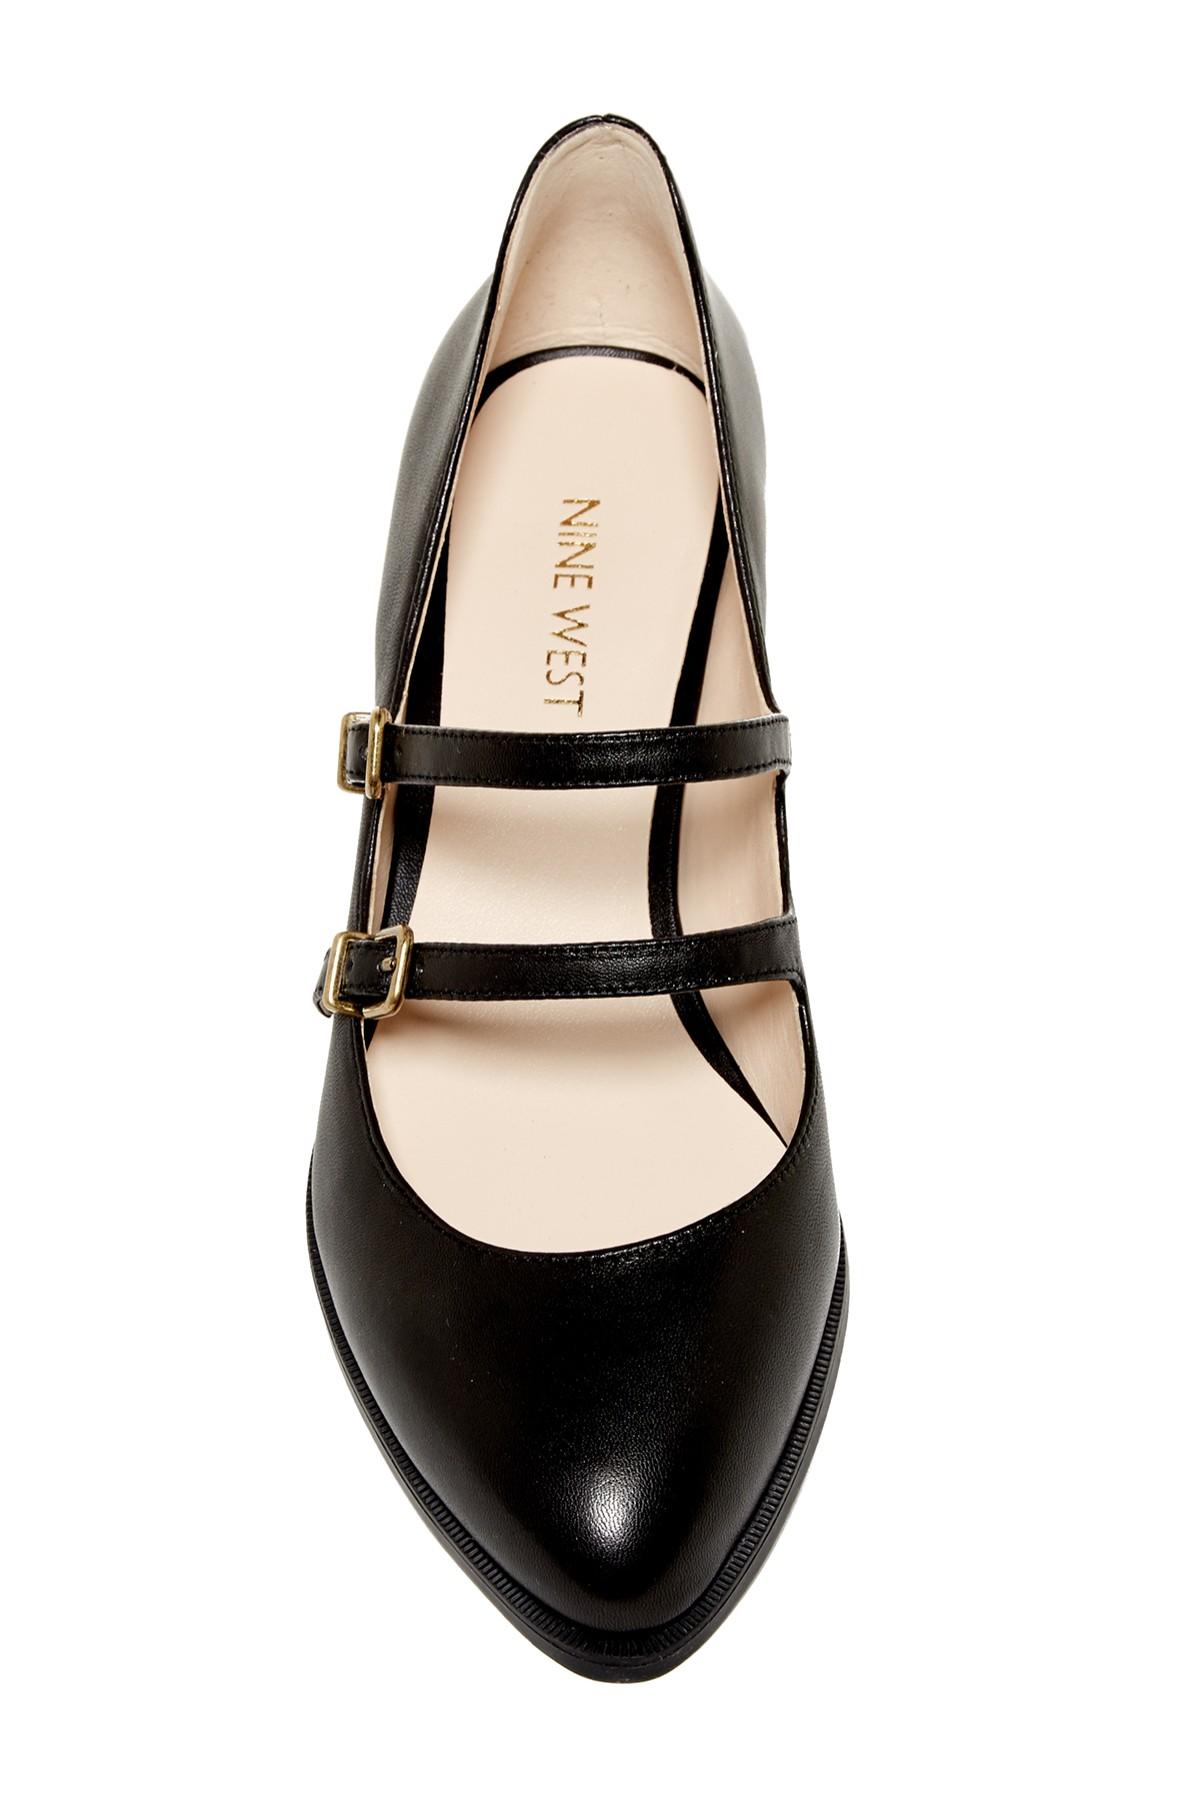 Nine West Leather Nalita Mary Jane in Black le (Black) - Lyst